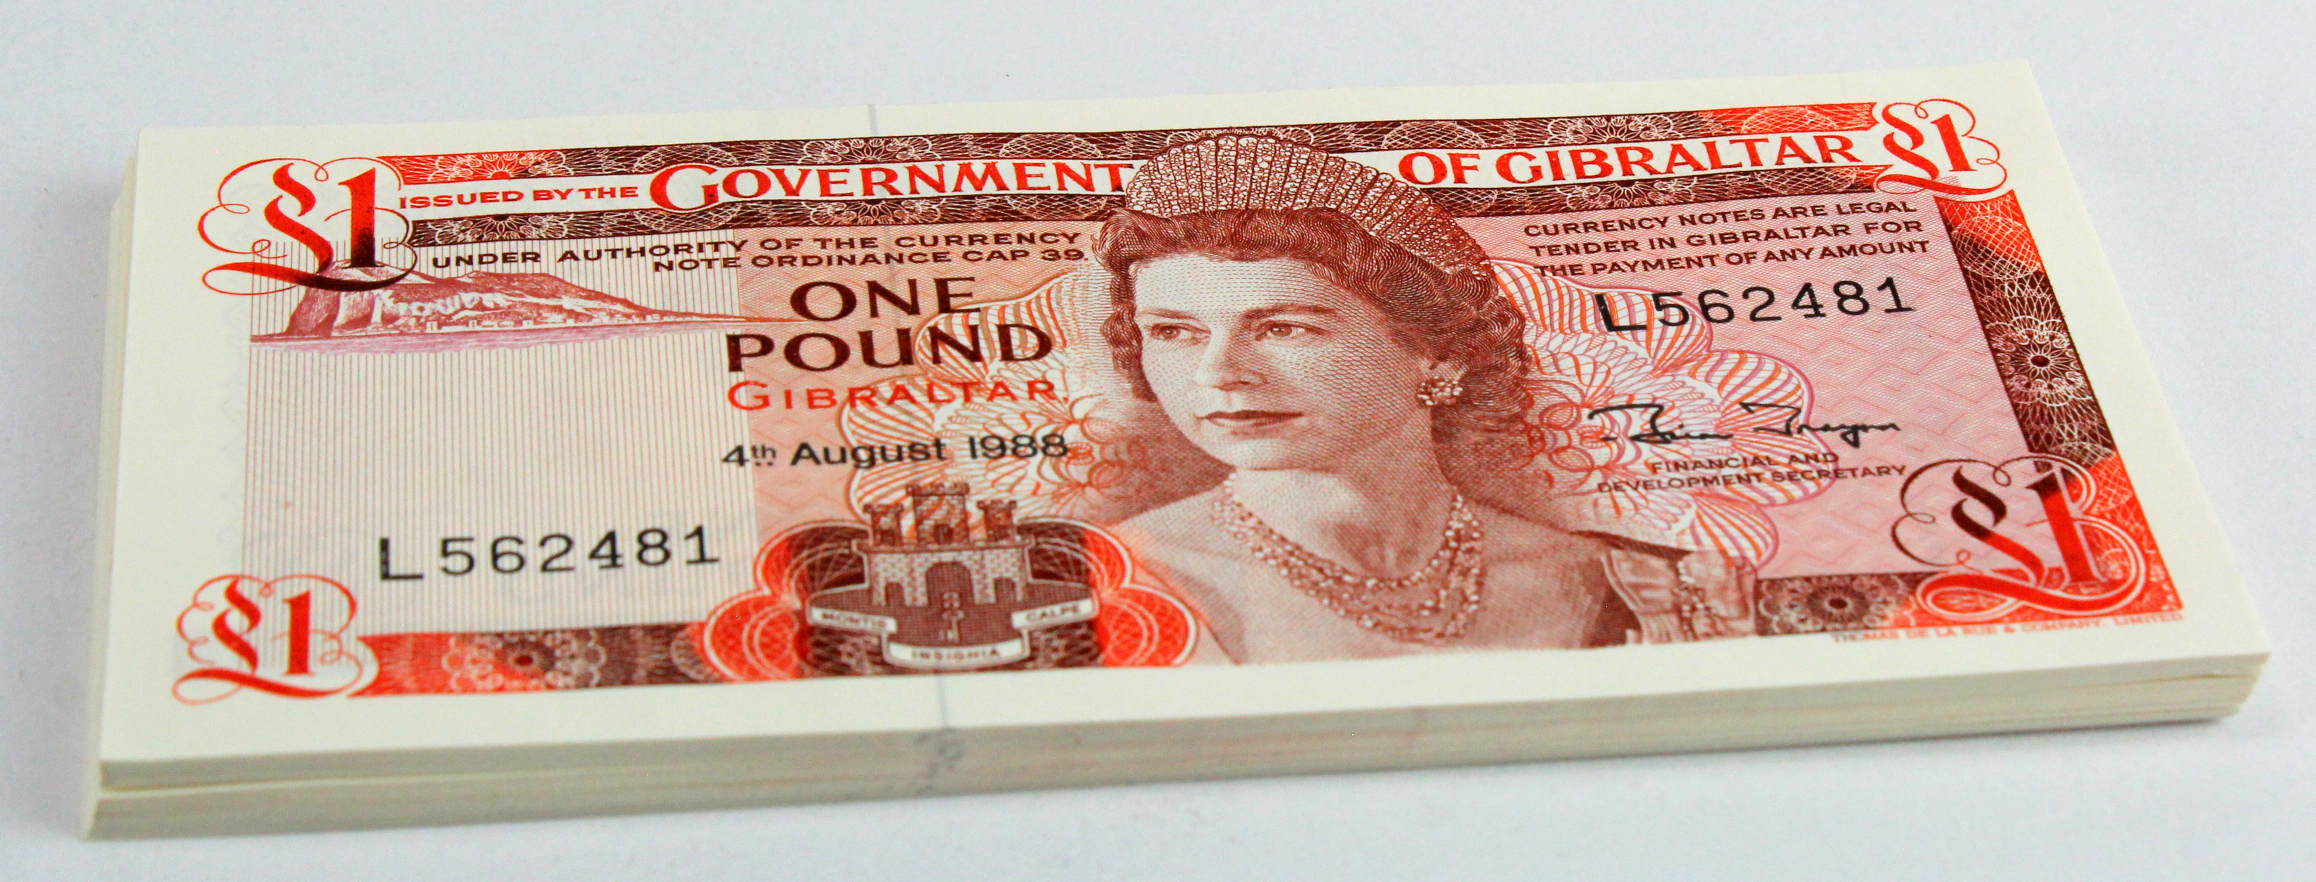 Gibraltar 1 Pound (50) dated 4th August 1988, two consecutively numbered runs of 20 notes in each